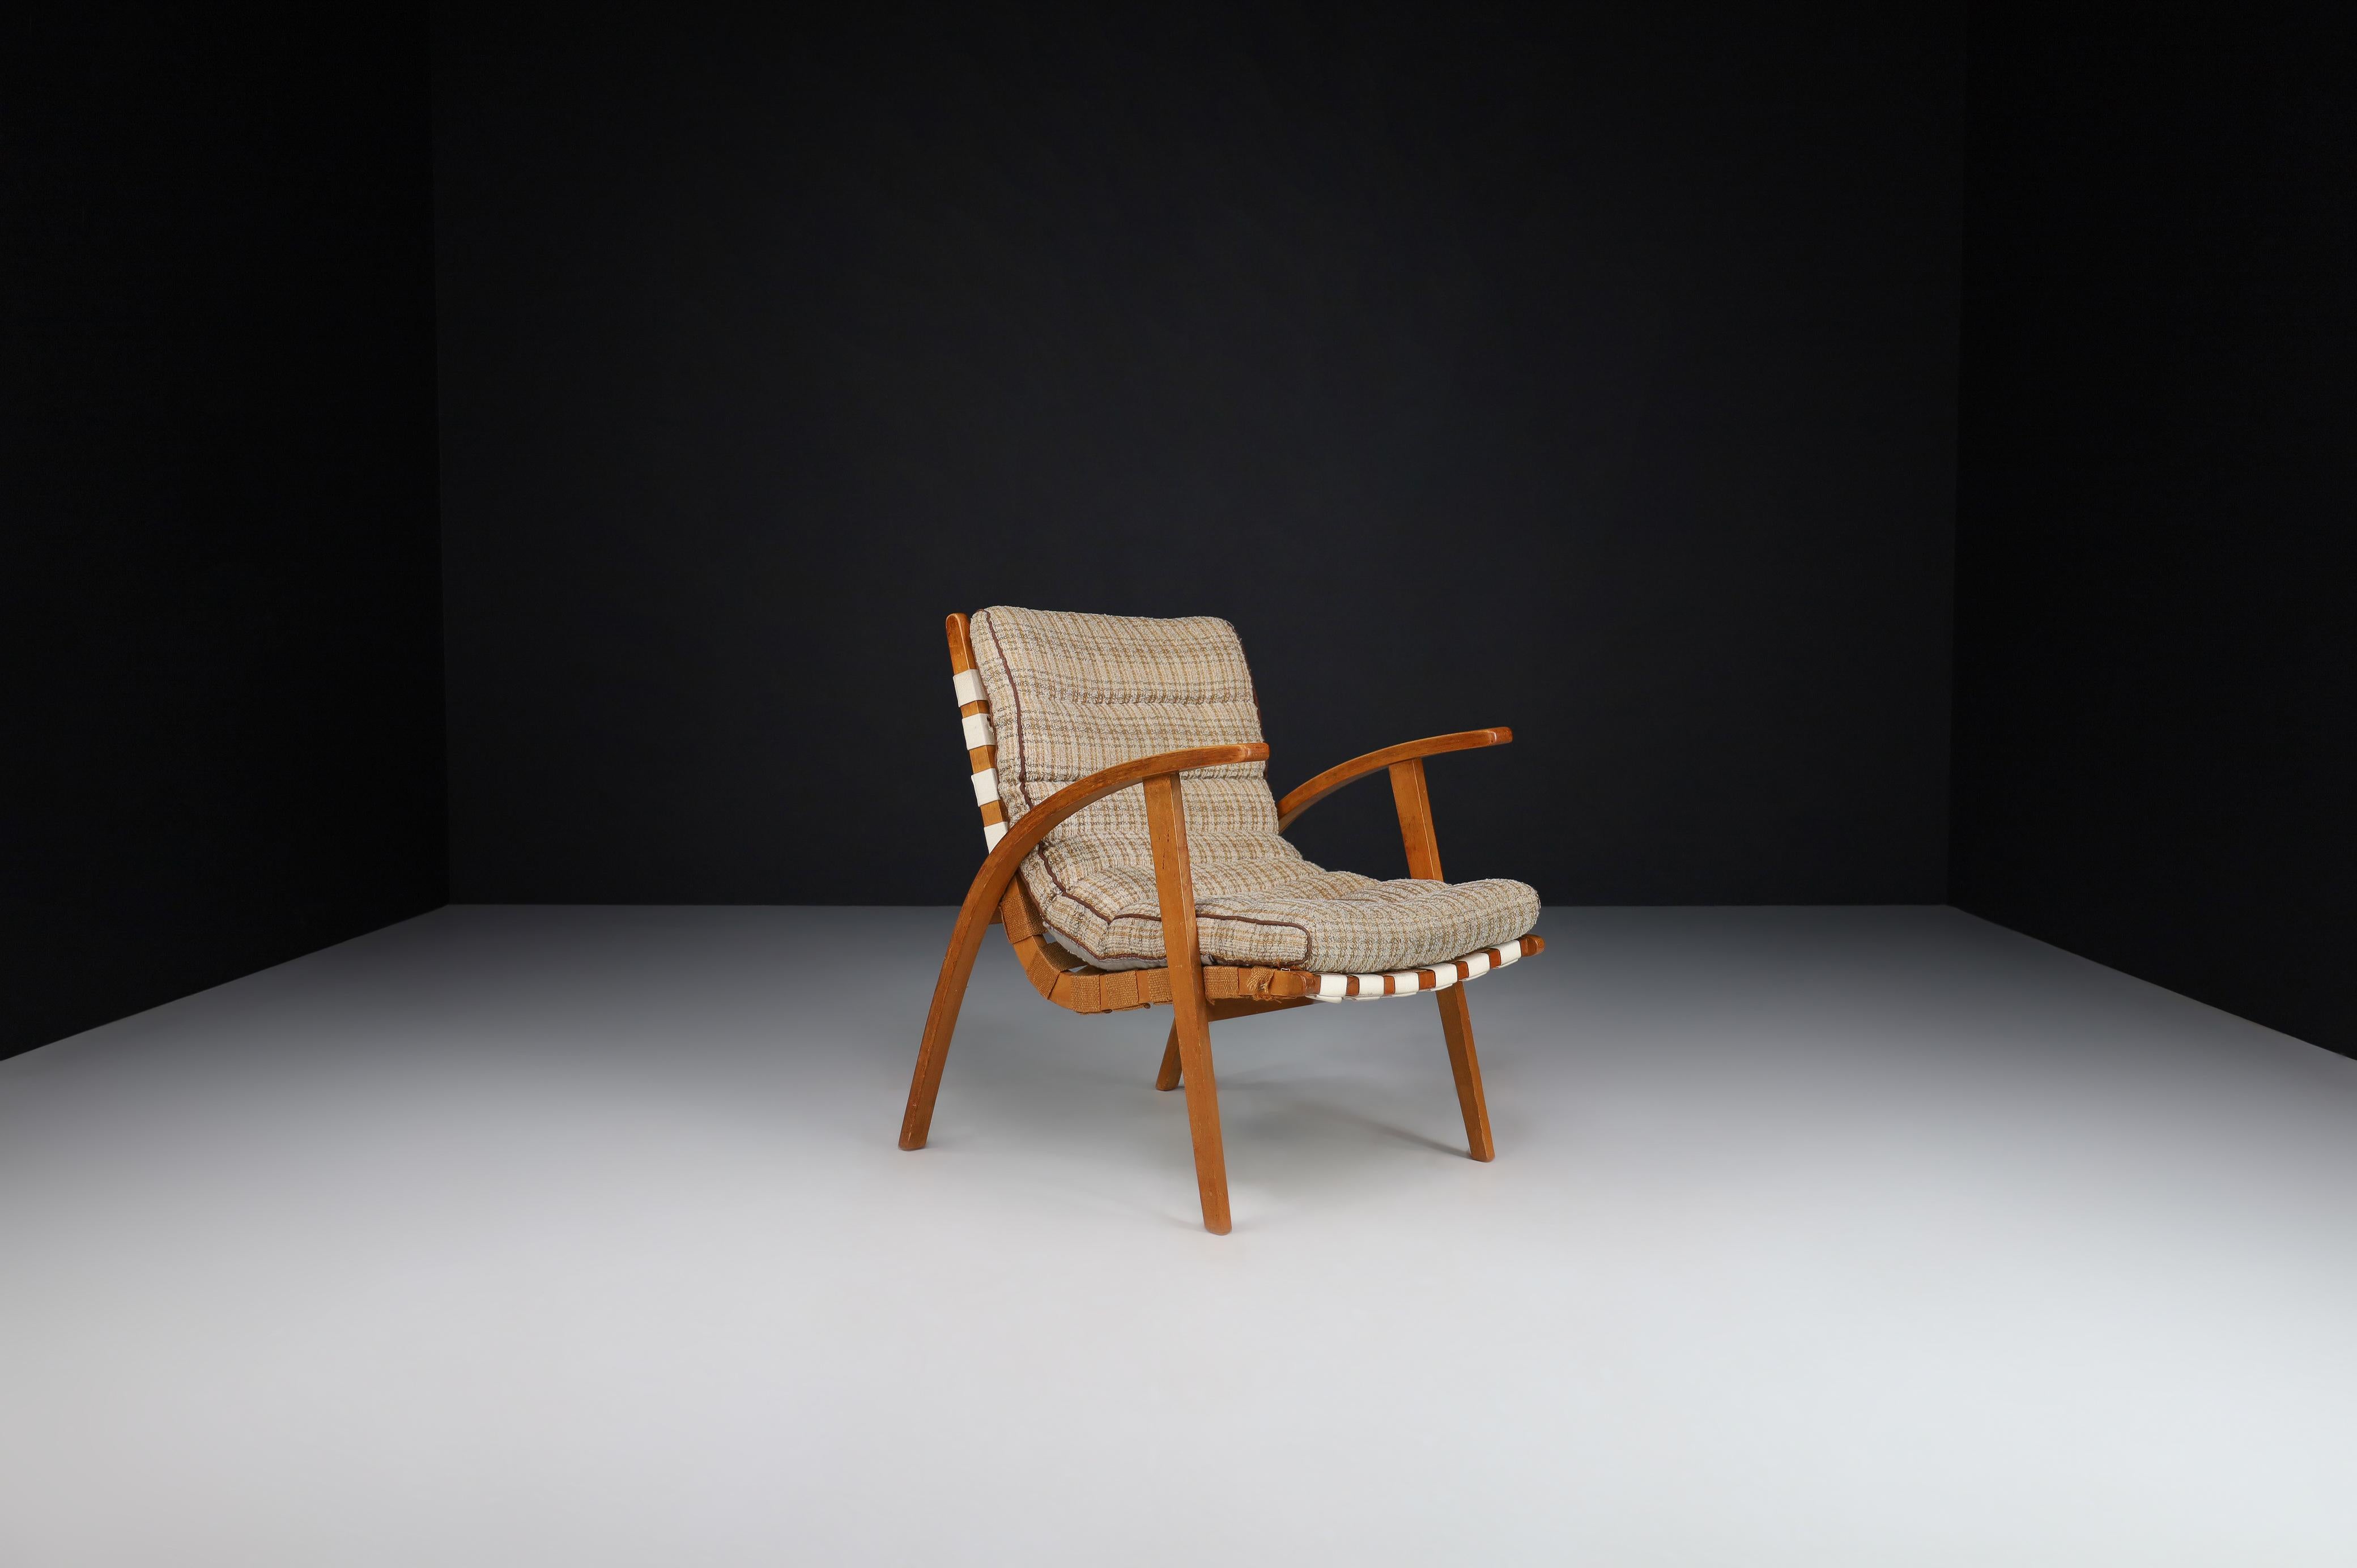 Jan Vanek easy chair in bentwood and canvas, Praque, the 1930s

Czech architect Jan Vanek designed the Bauhaus easy chair in the 1930s, a contemporary of Jindrich Halabala. This chair is upholstered initially with a patinated canvas seat and